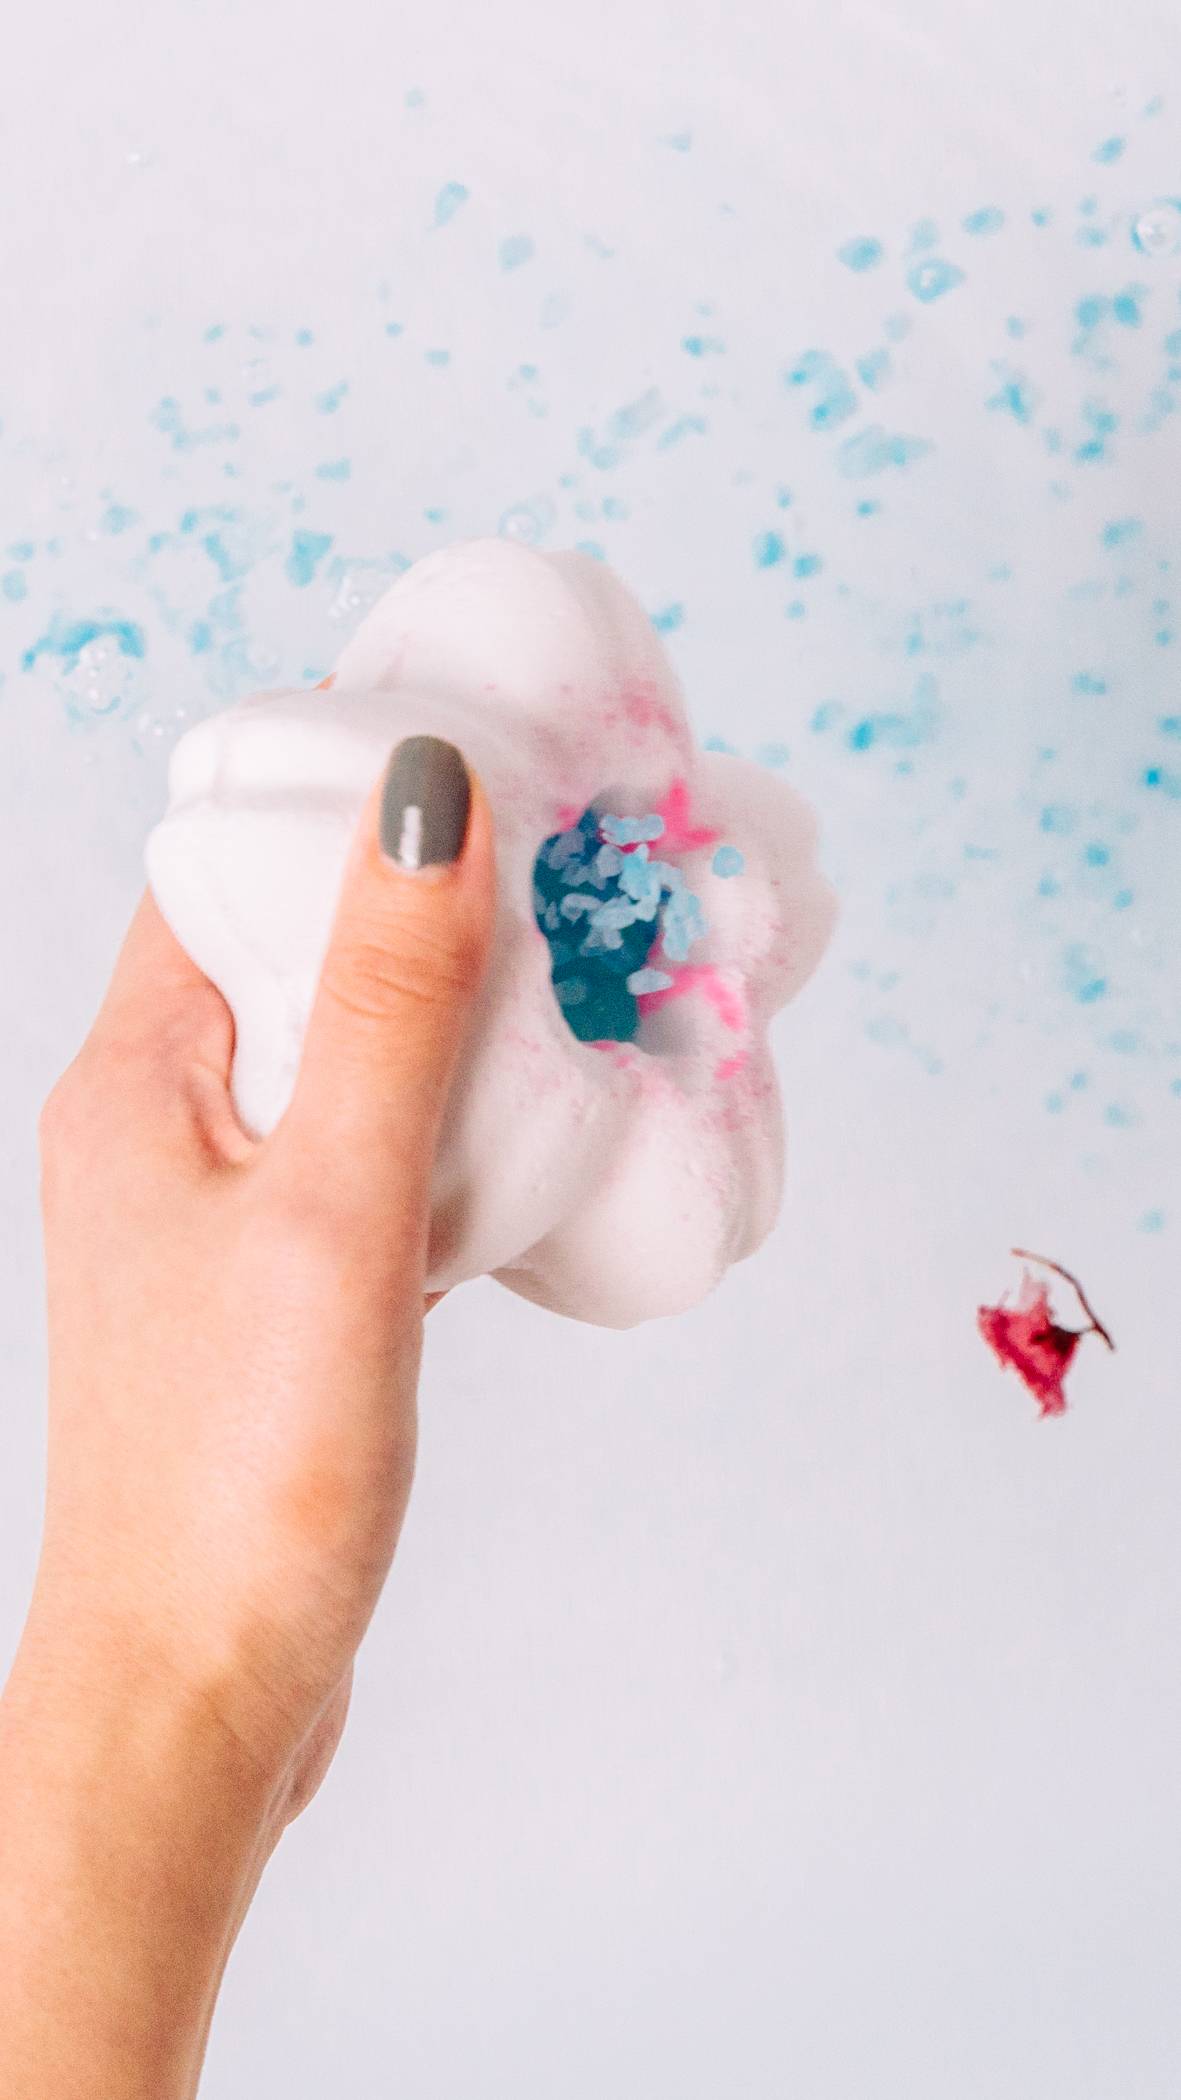 The image shows the model sprinkling blue bath salts from the white bath bomb flower part into the bath water below. 